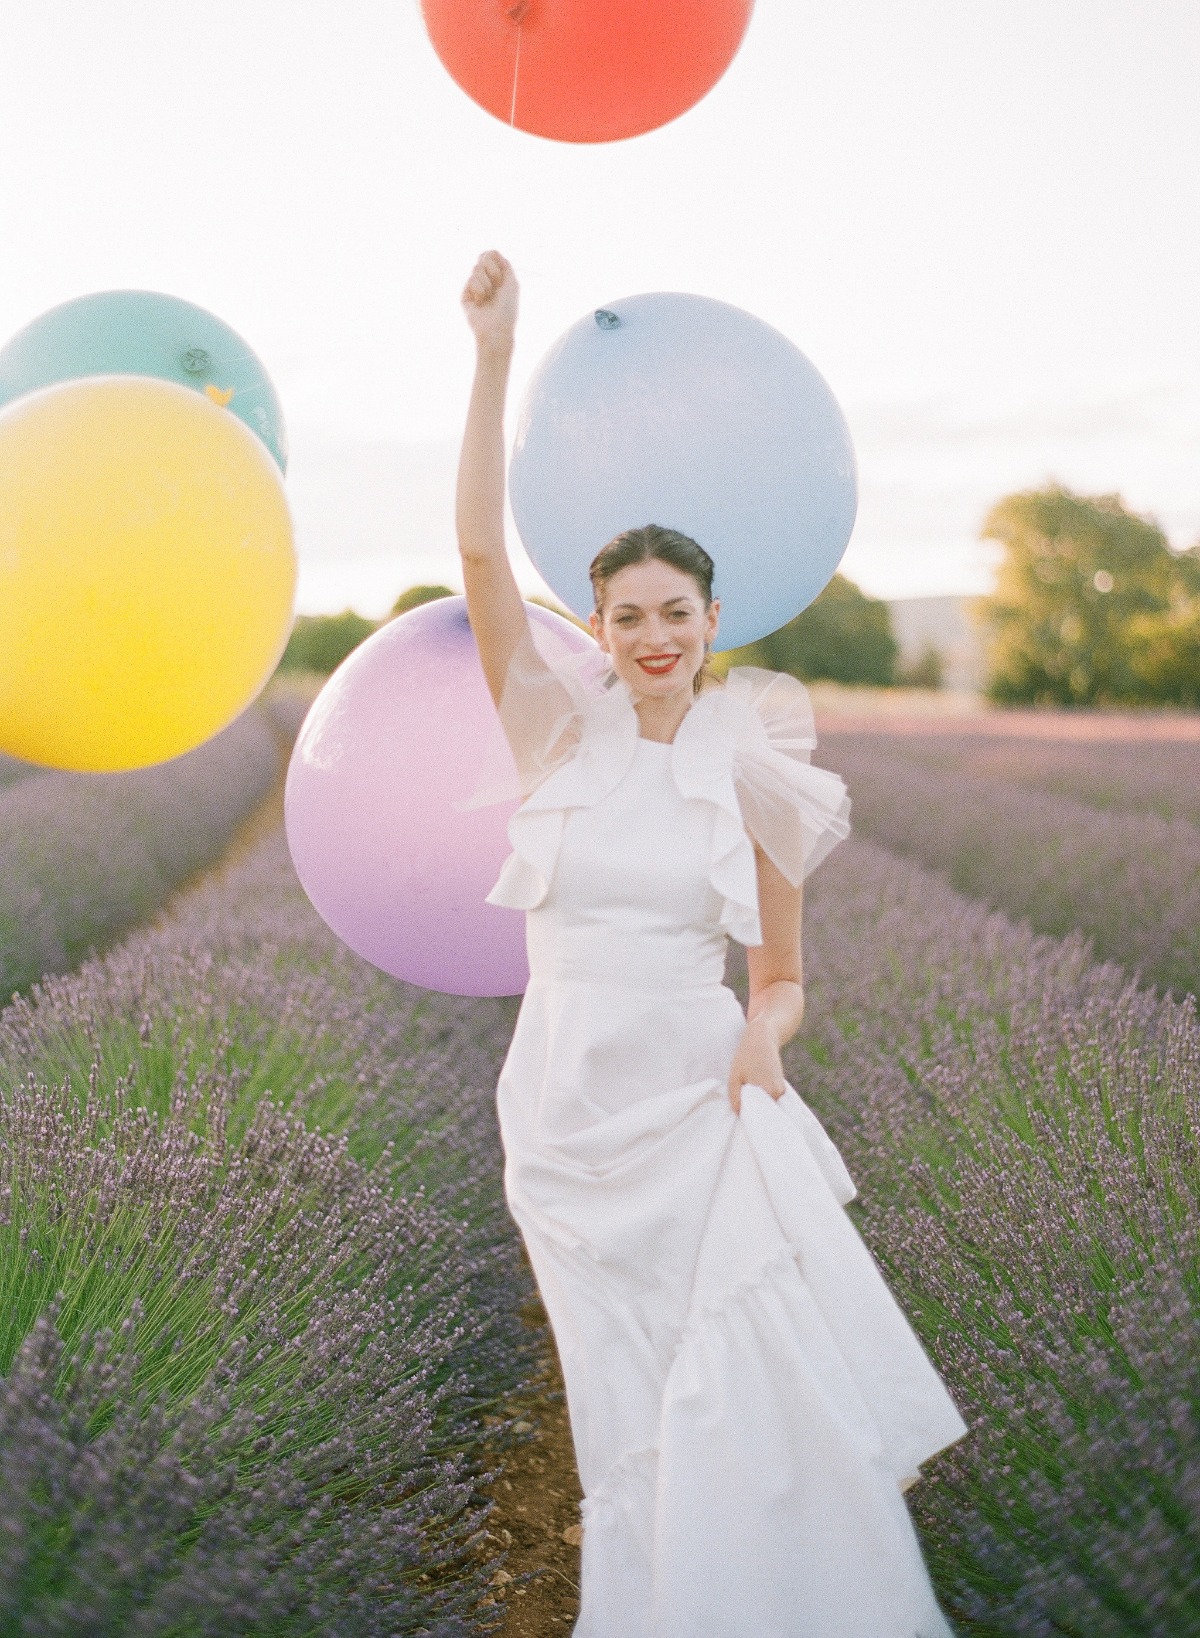 Colorful Wedding Inspiration Shoot In The Lavender Fields of Provence